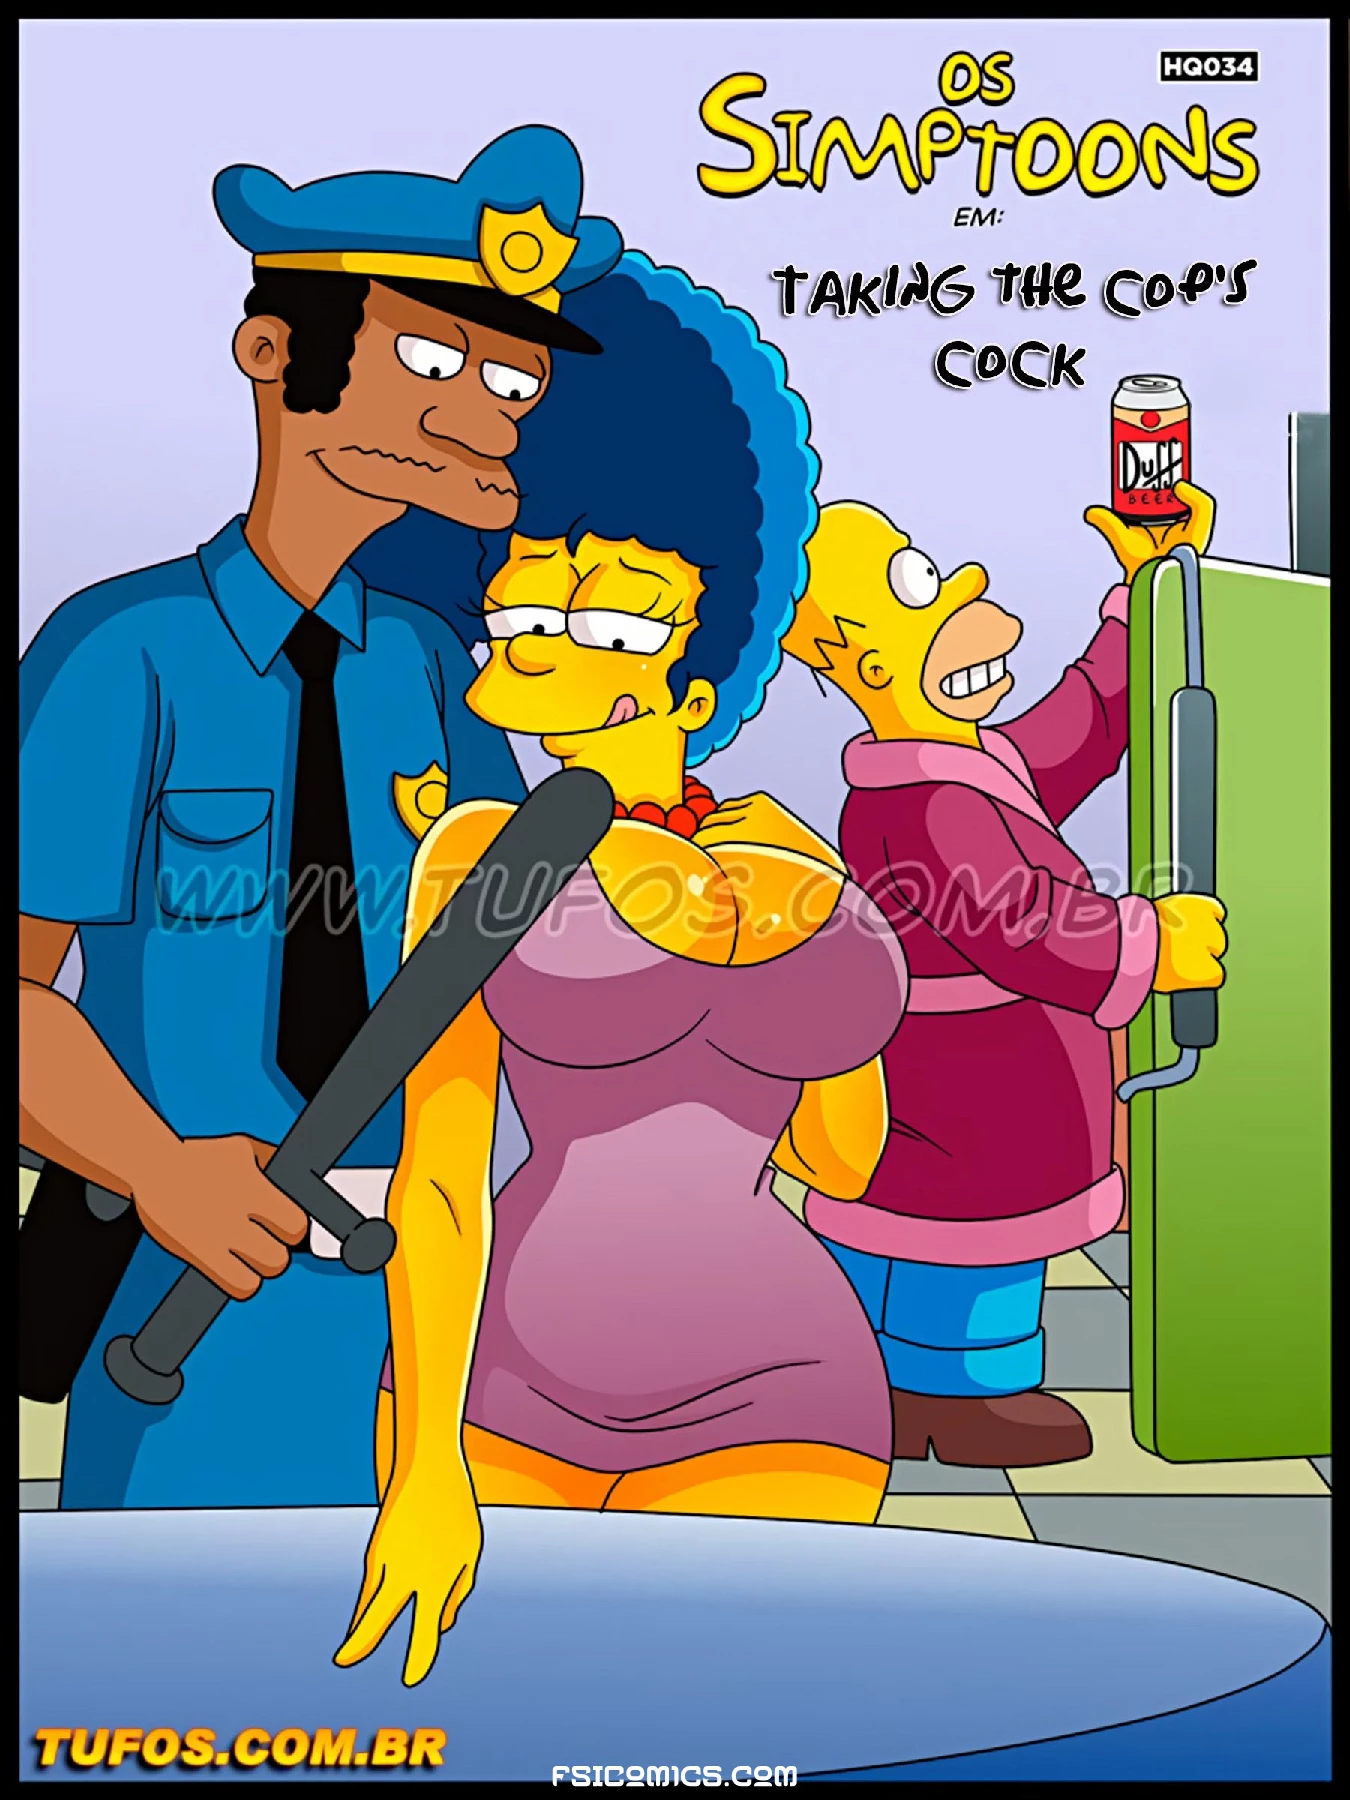 The Simpsons Chapter 34 – Taking the Cop's Cock – WC TF - 39 - FSIComics